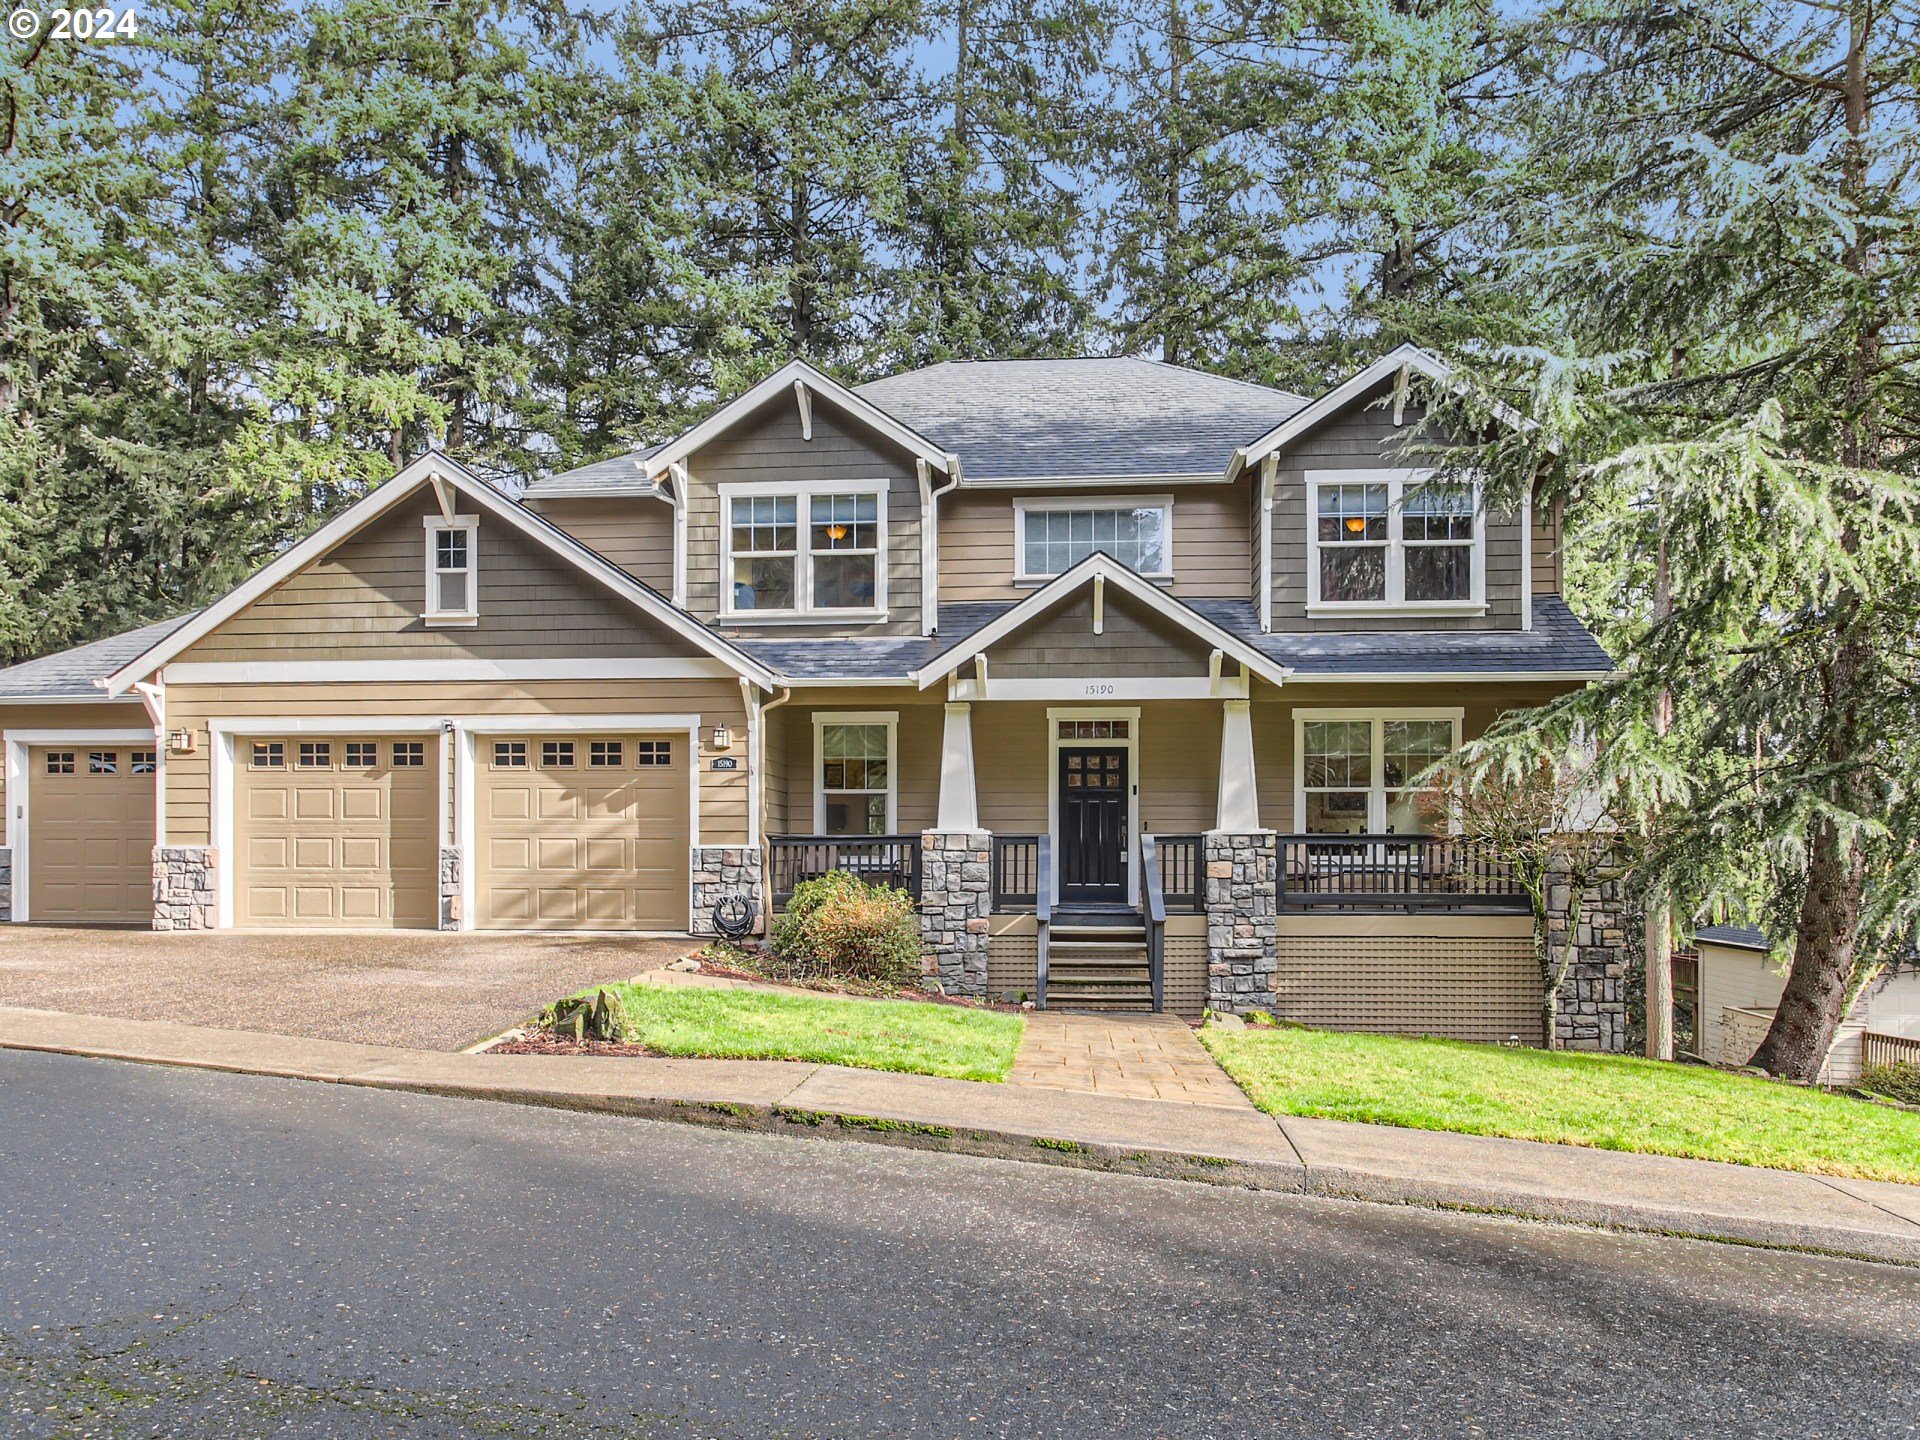 15190 SW 139TH AVE, Tigard, OR 